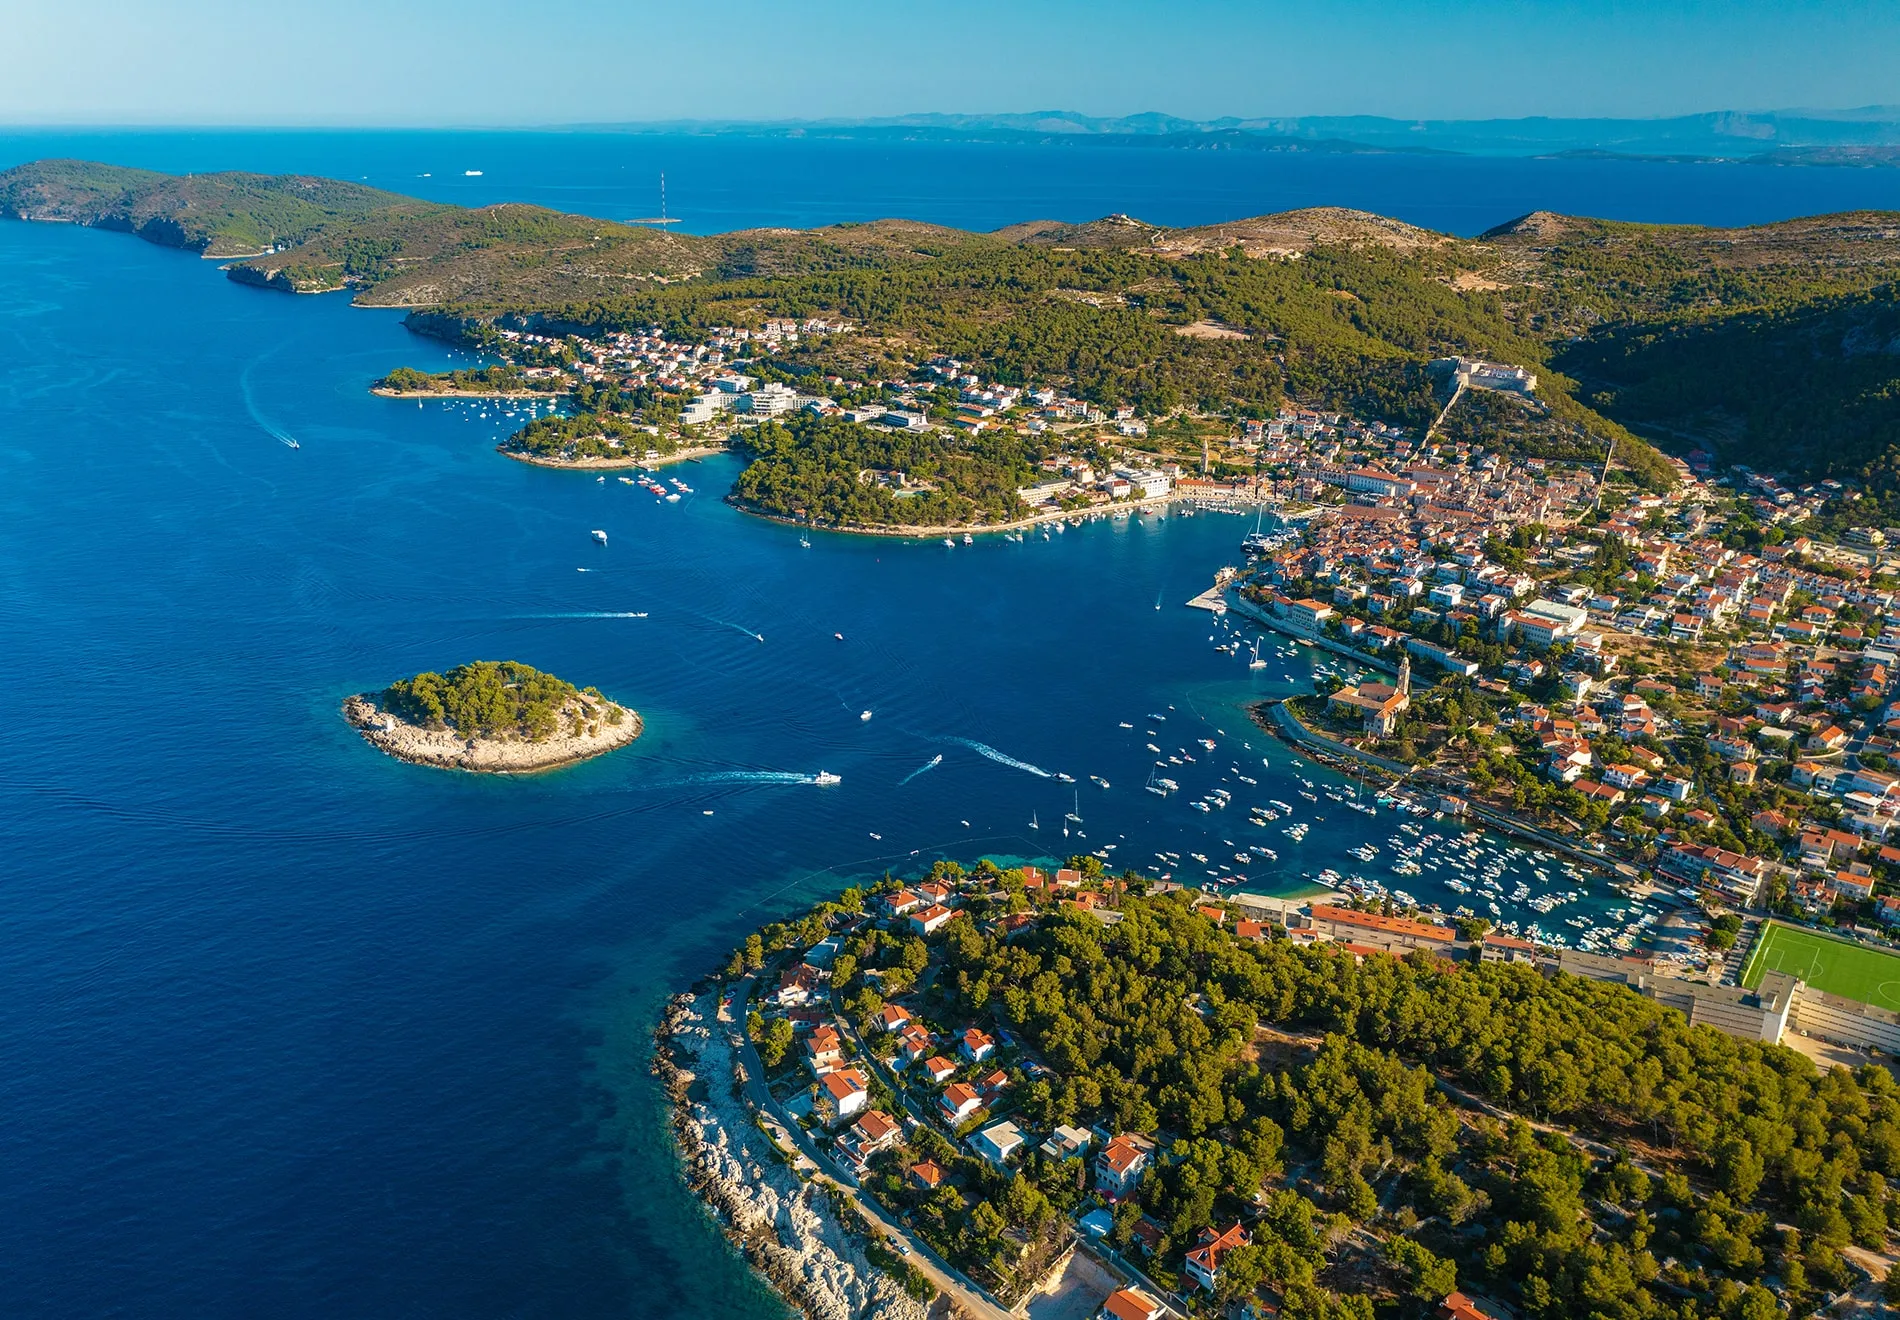 Cruise along the picturesque Adriatic coast, stopping at charming islands like Hvar and Brač